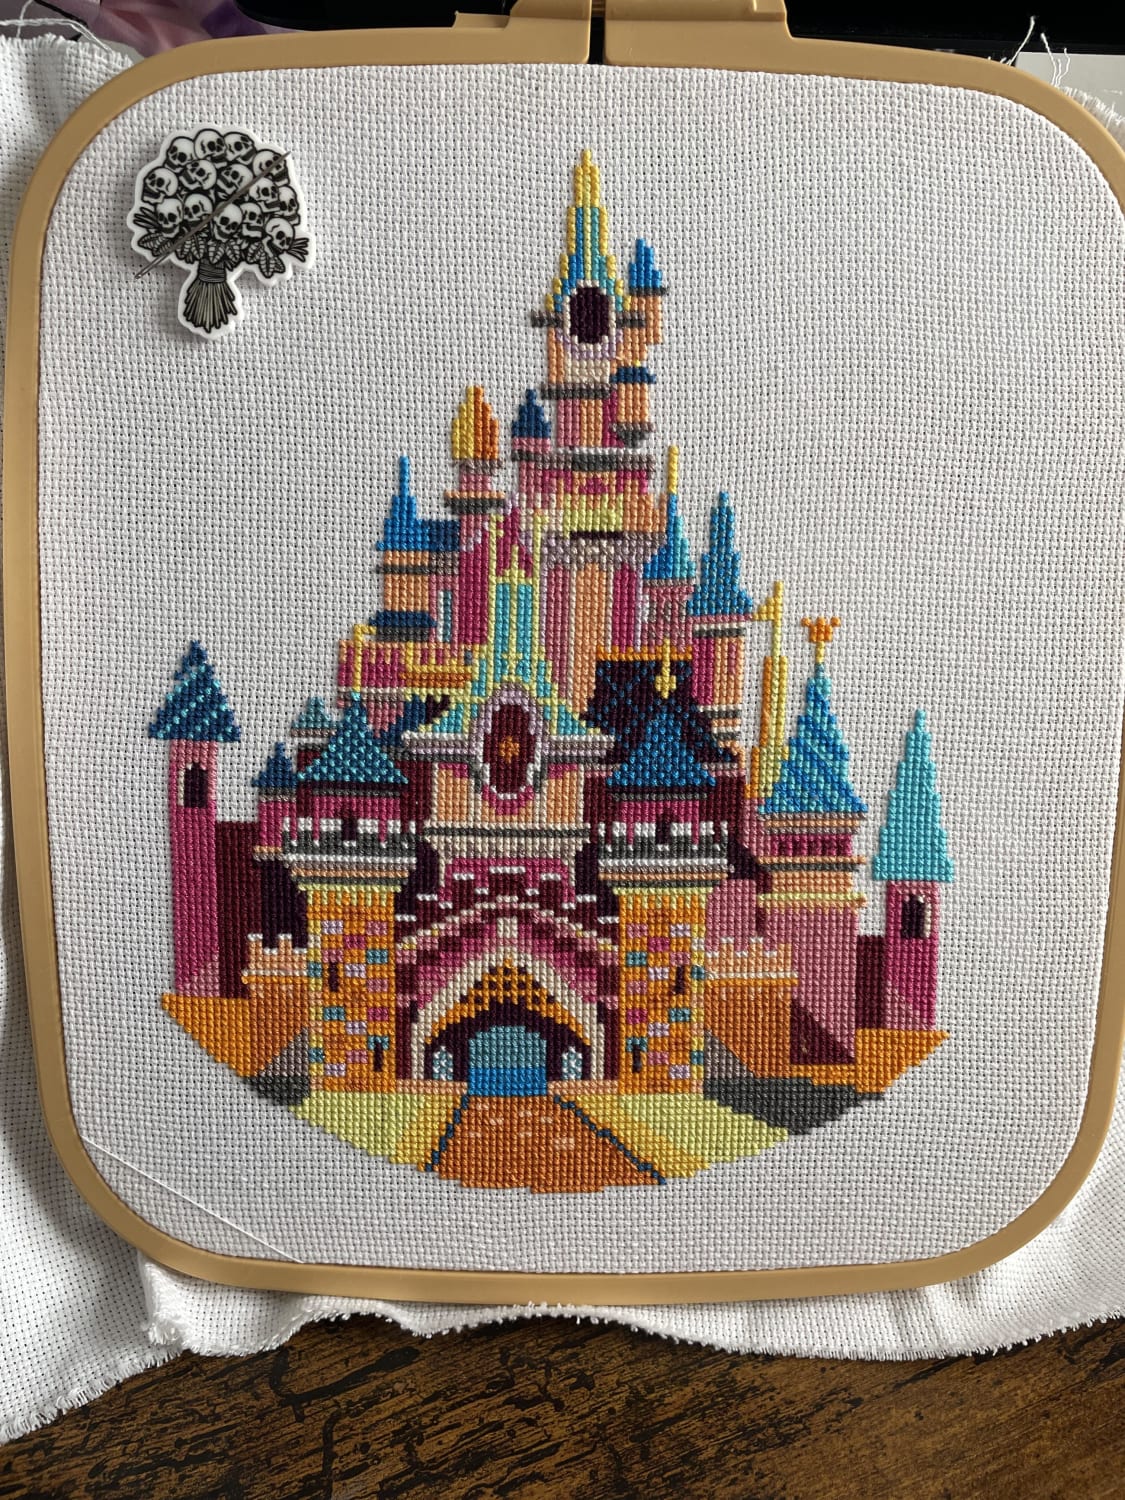 [FO] Sleeping Beauty castle by AwesomePatternStudio. 53 hours total. Pattern number 2/4 for my friends wedding table decorations.